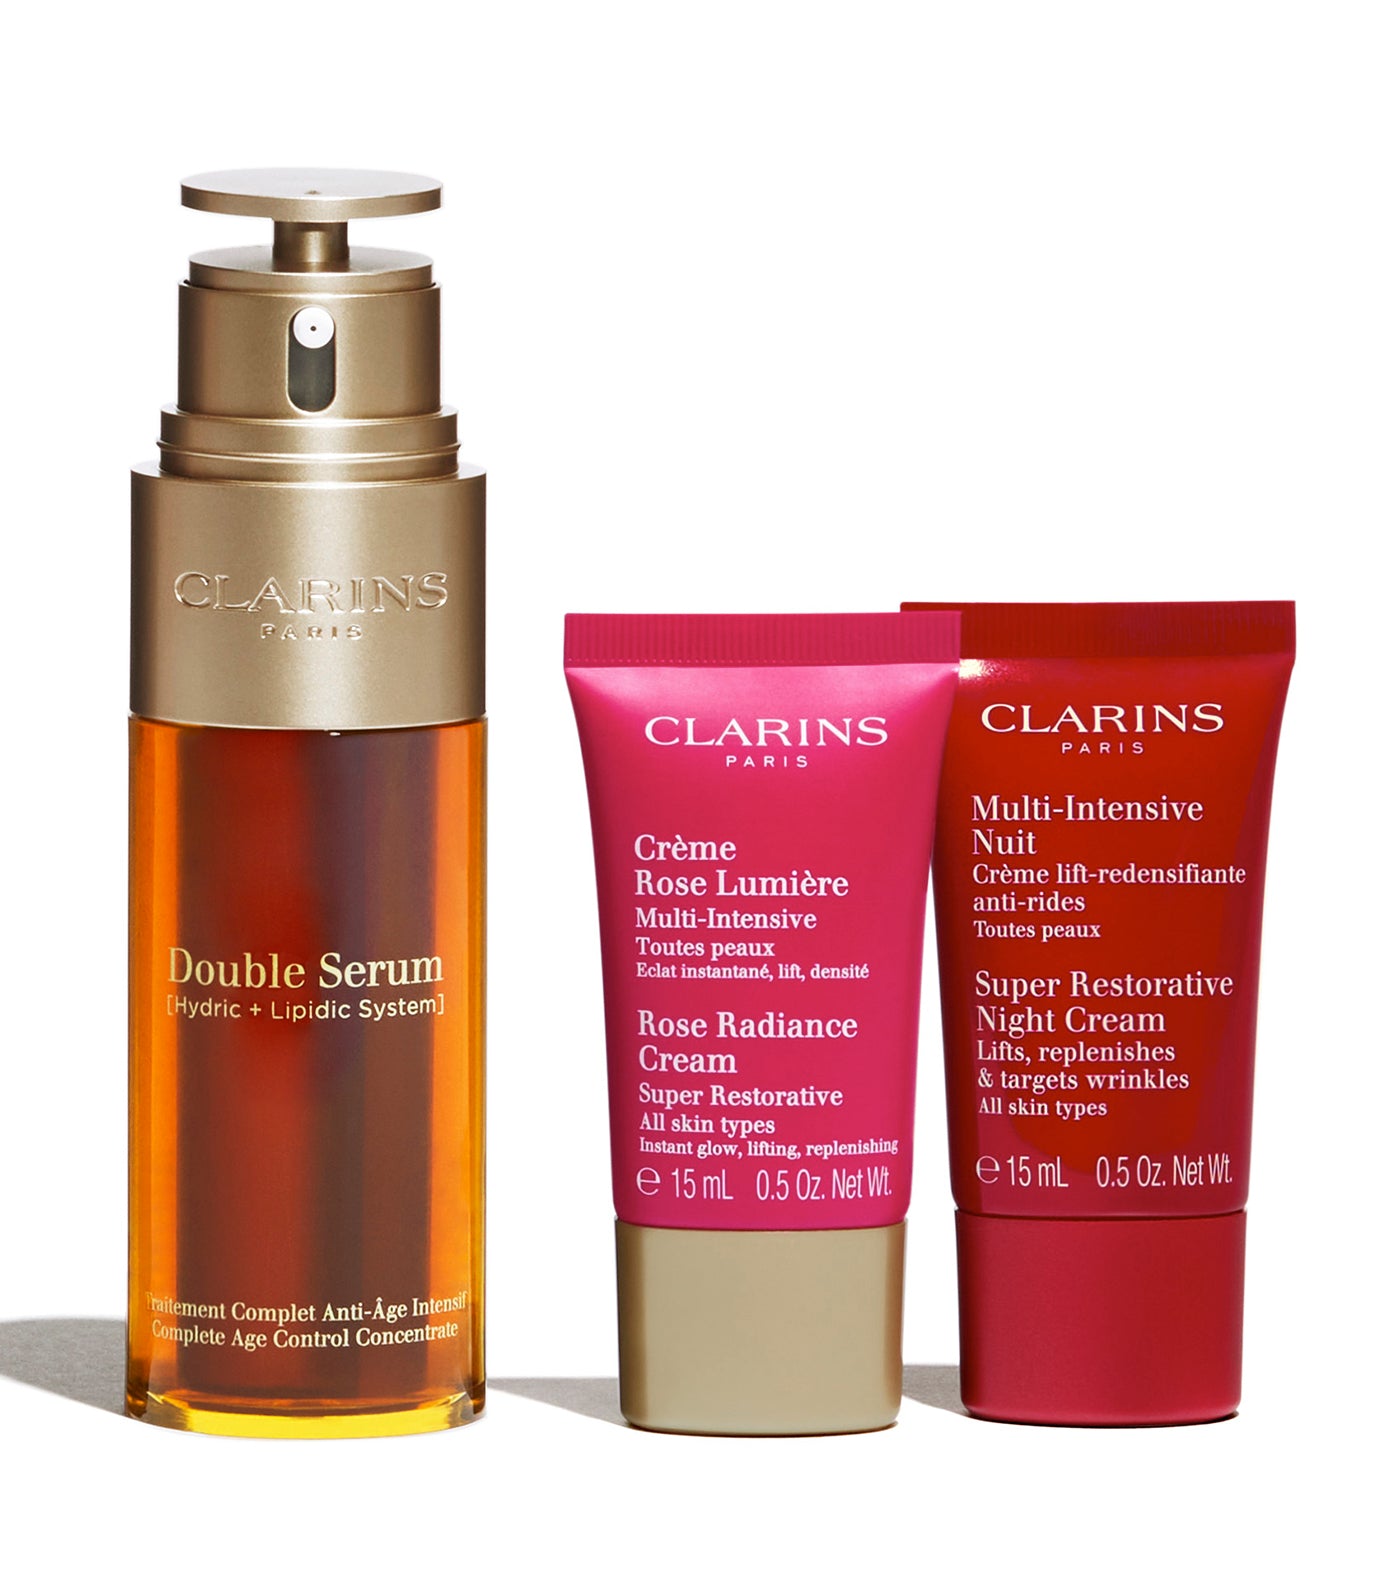 Double Serum and Super Restorative Collection